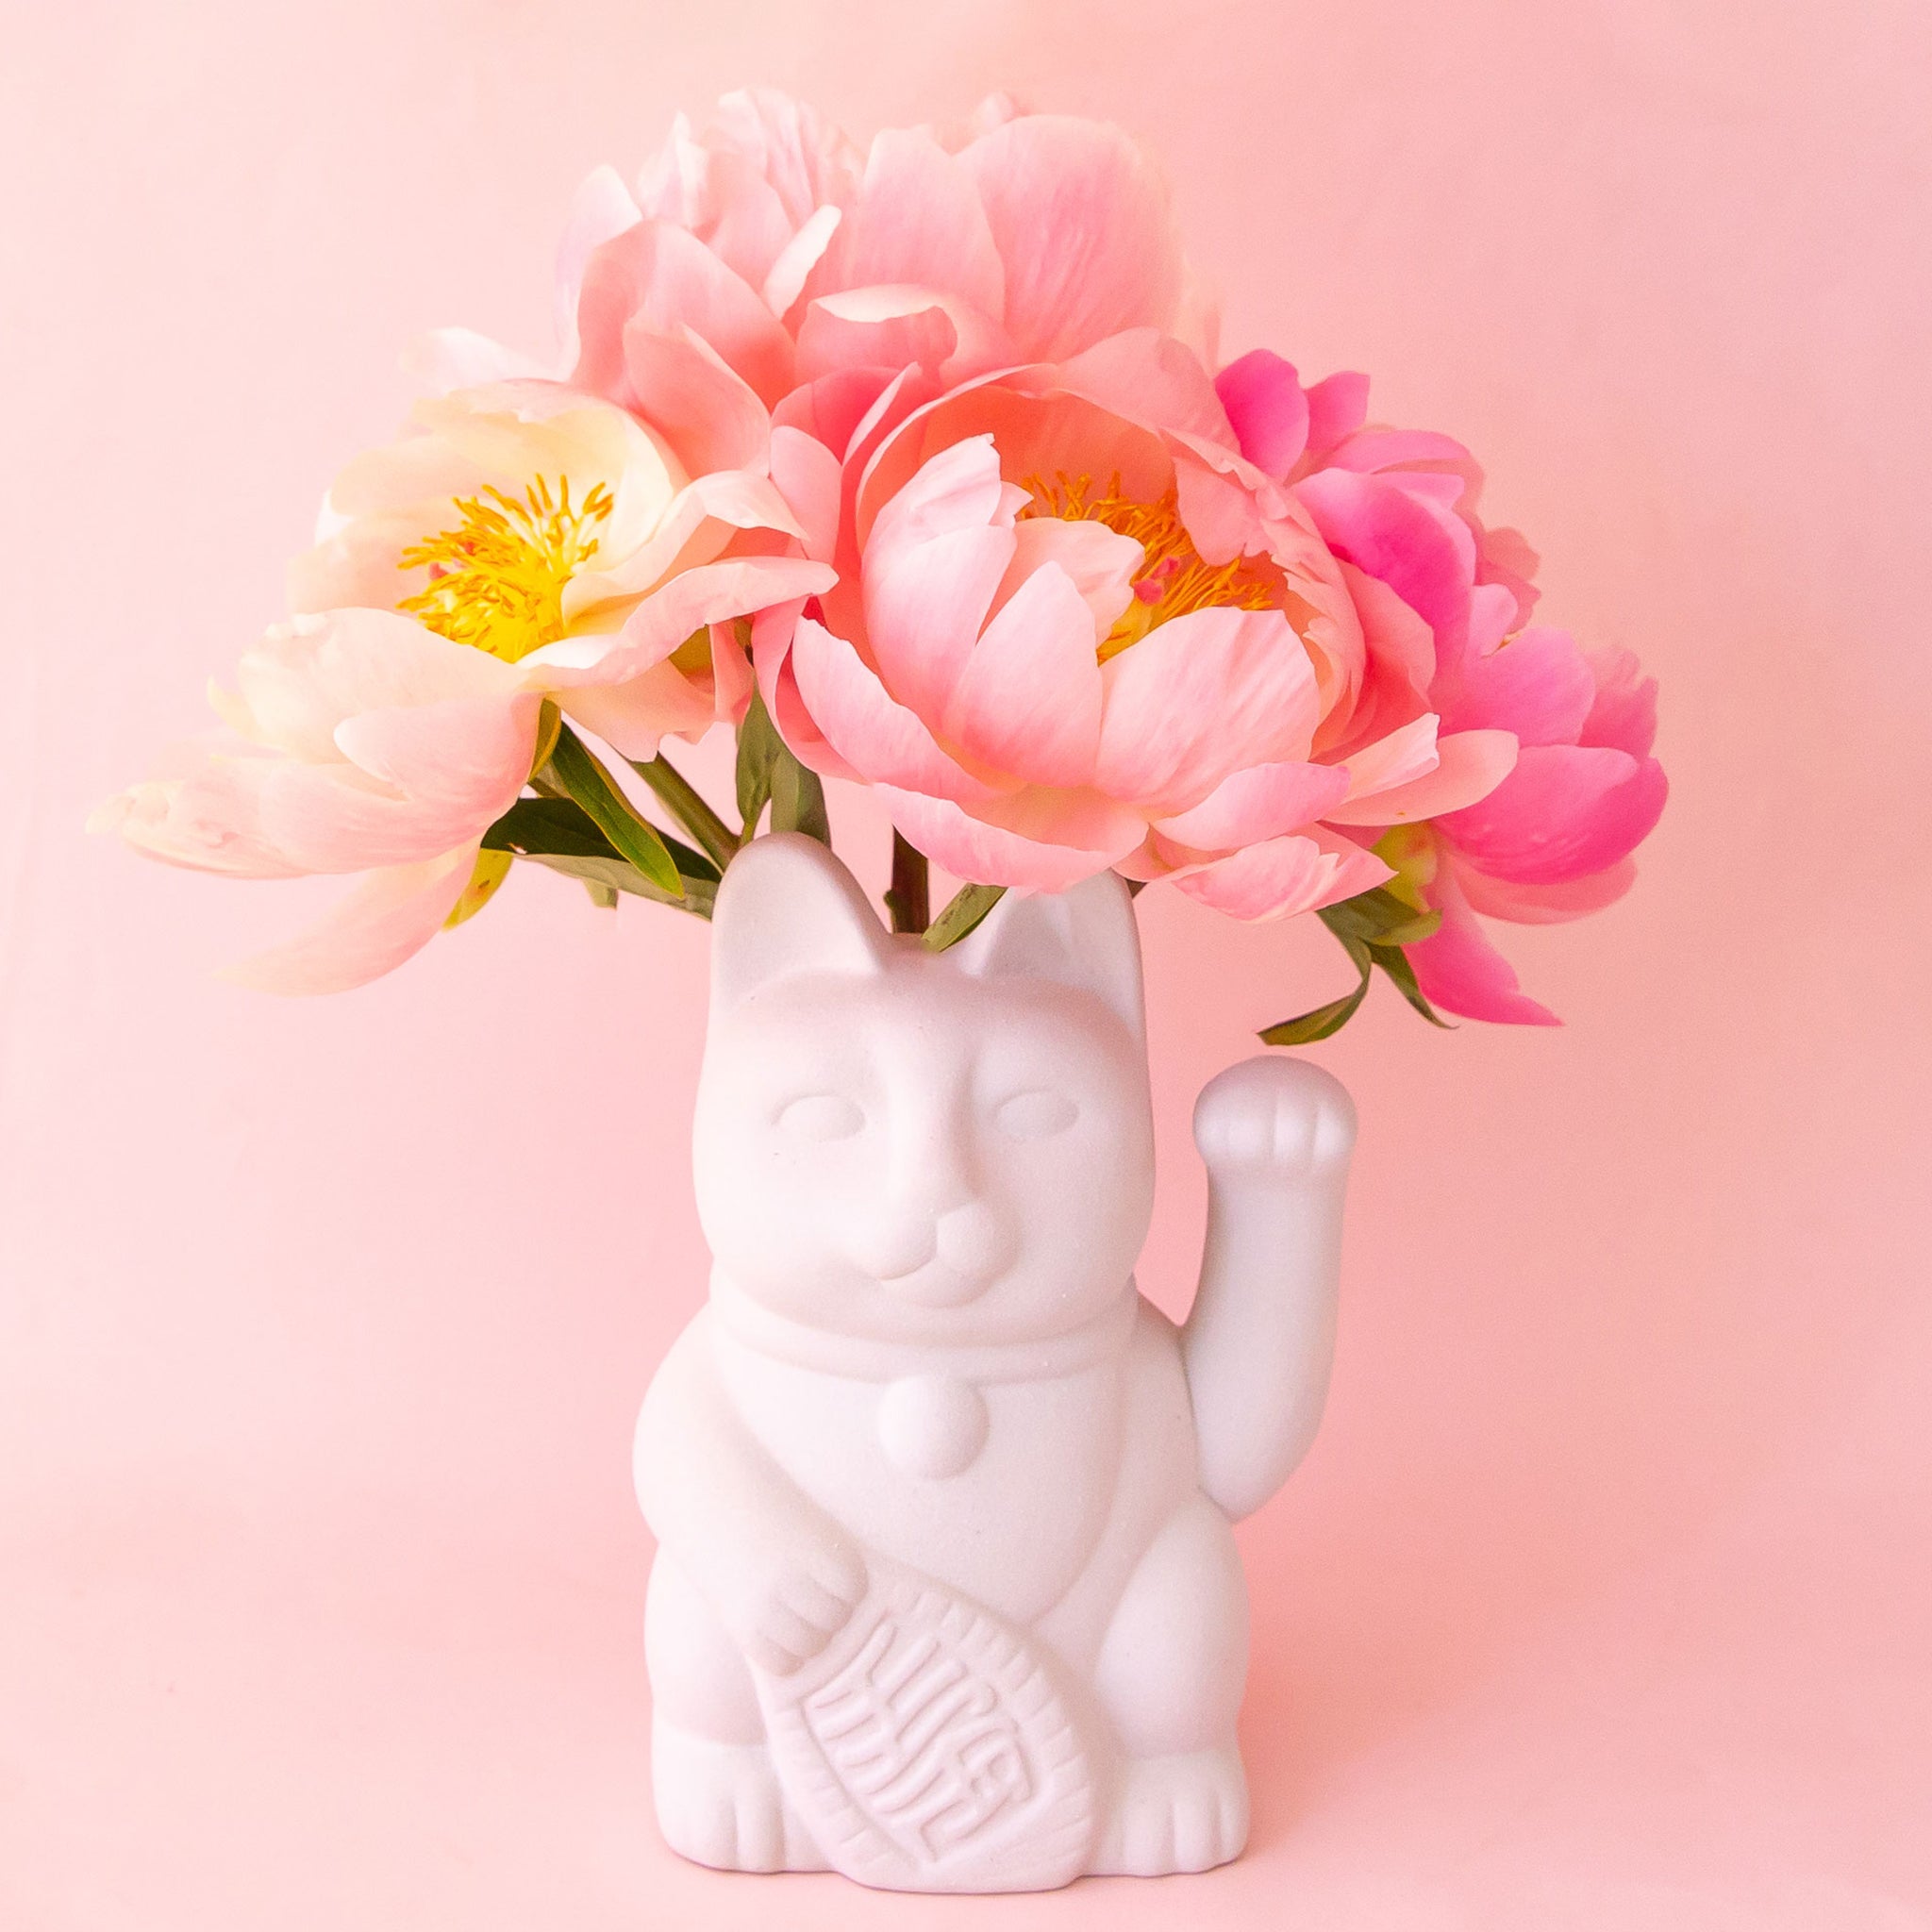 A ceramic lucky cat vase in white with its paw up in the waving position staged here with natural florals.